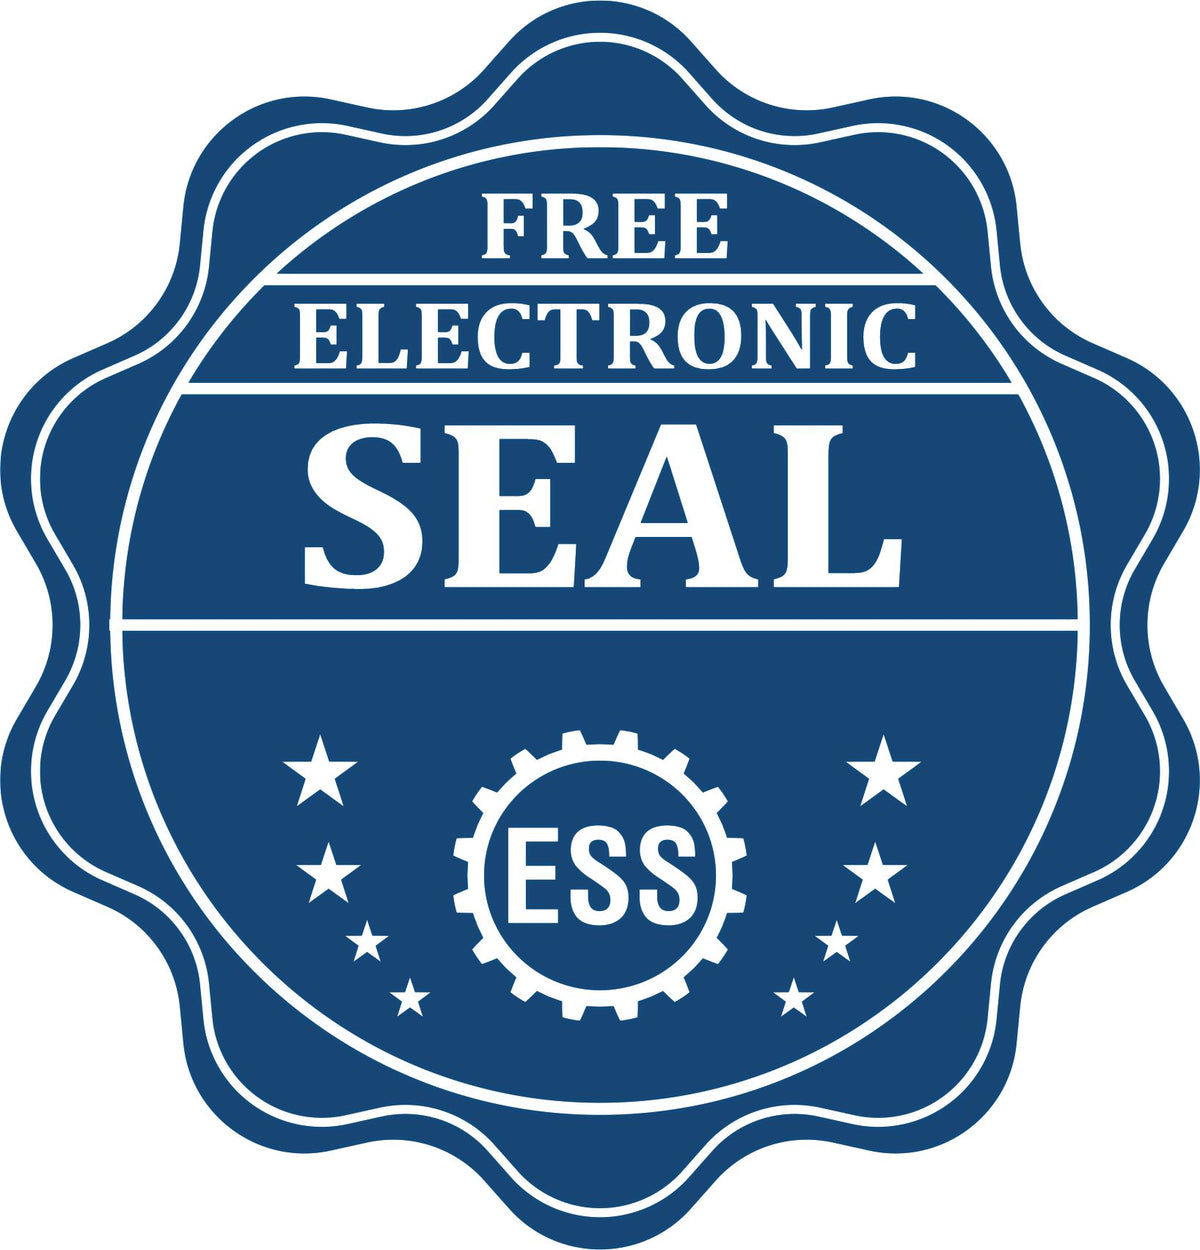 A badge showing a free electronic seal for the Hybrid Arizona Geologist Seal with stars and the ESS gear on the emblem.